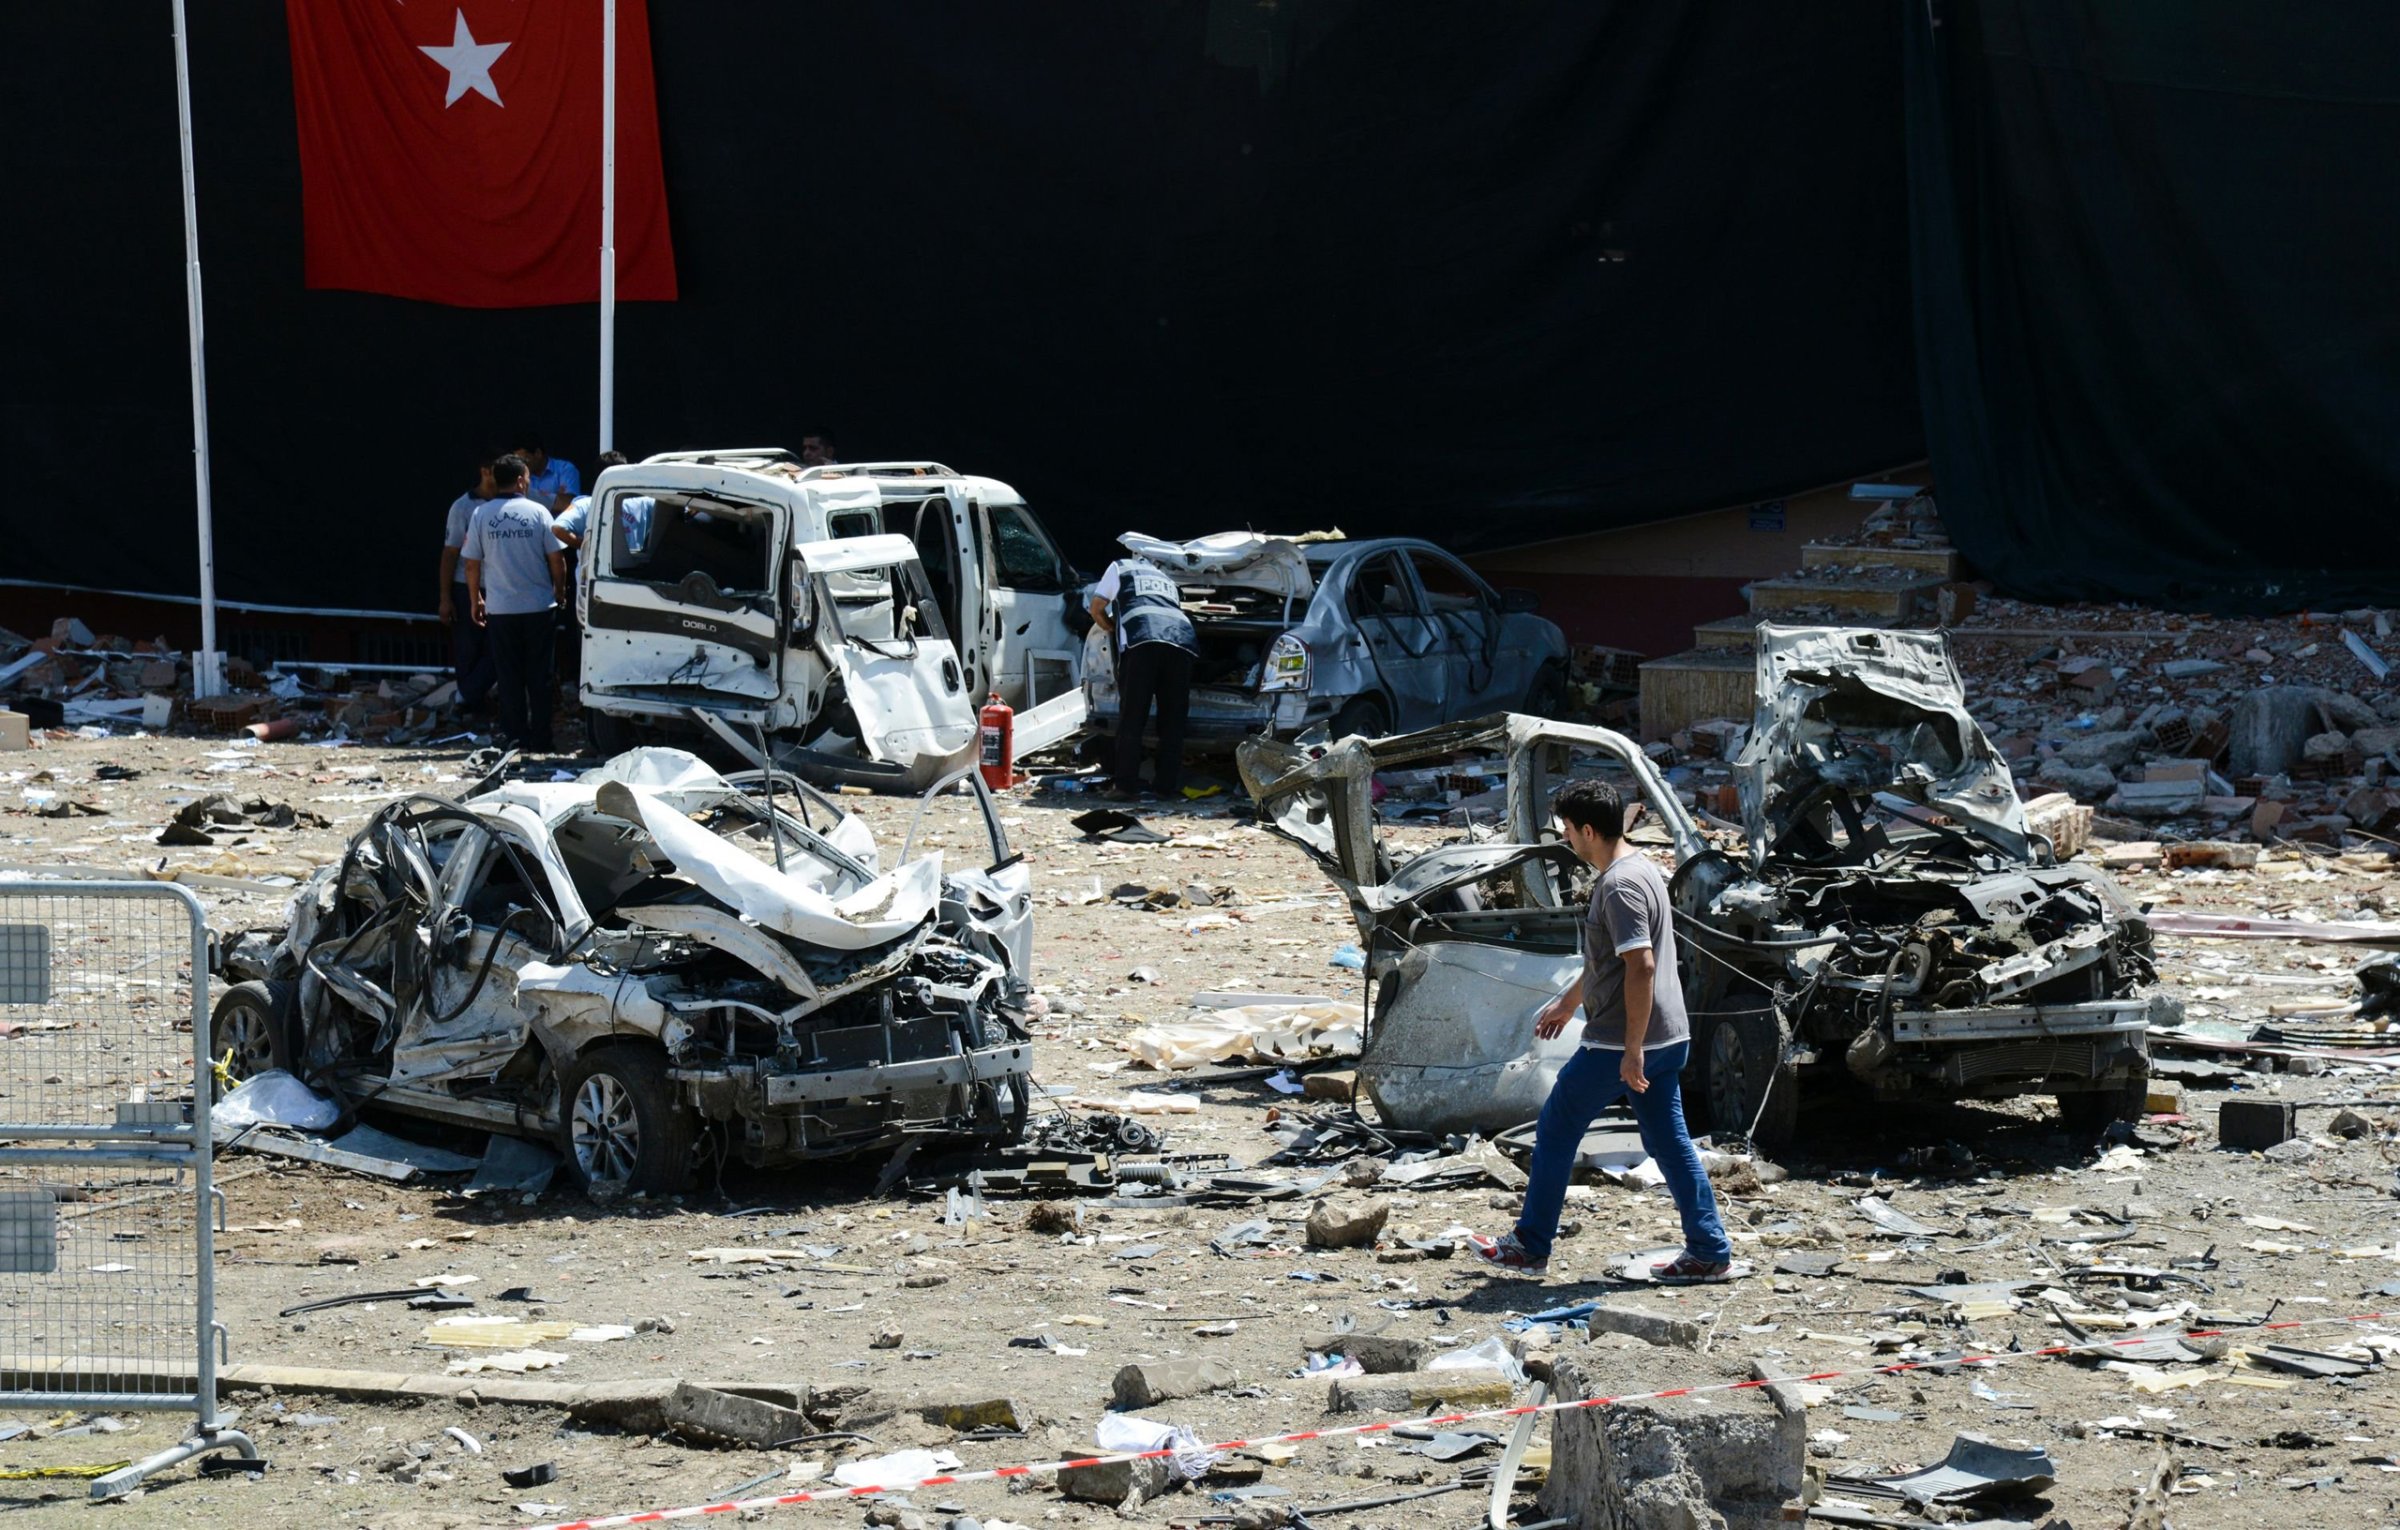 Turkish rescue workers stand by the wreckage of a vehicle as a Turkish police officer inspects a destroyed car and a man walks among the remains at the blast scene following a car bomb attack on a police station in the eastern Turkish city of Elazig, on Aug. 18, 2016.